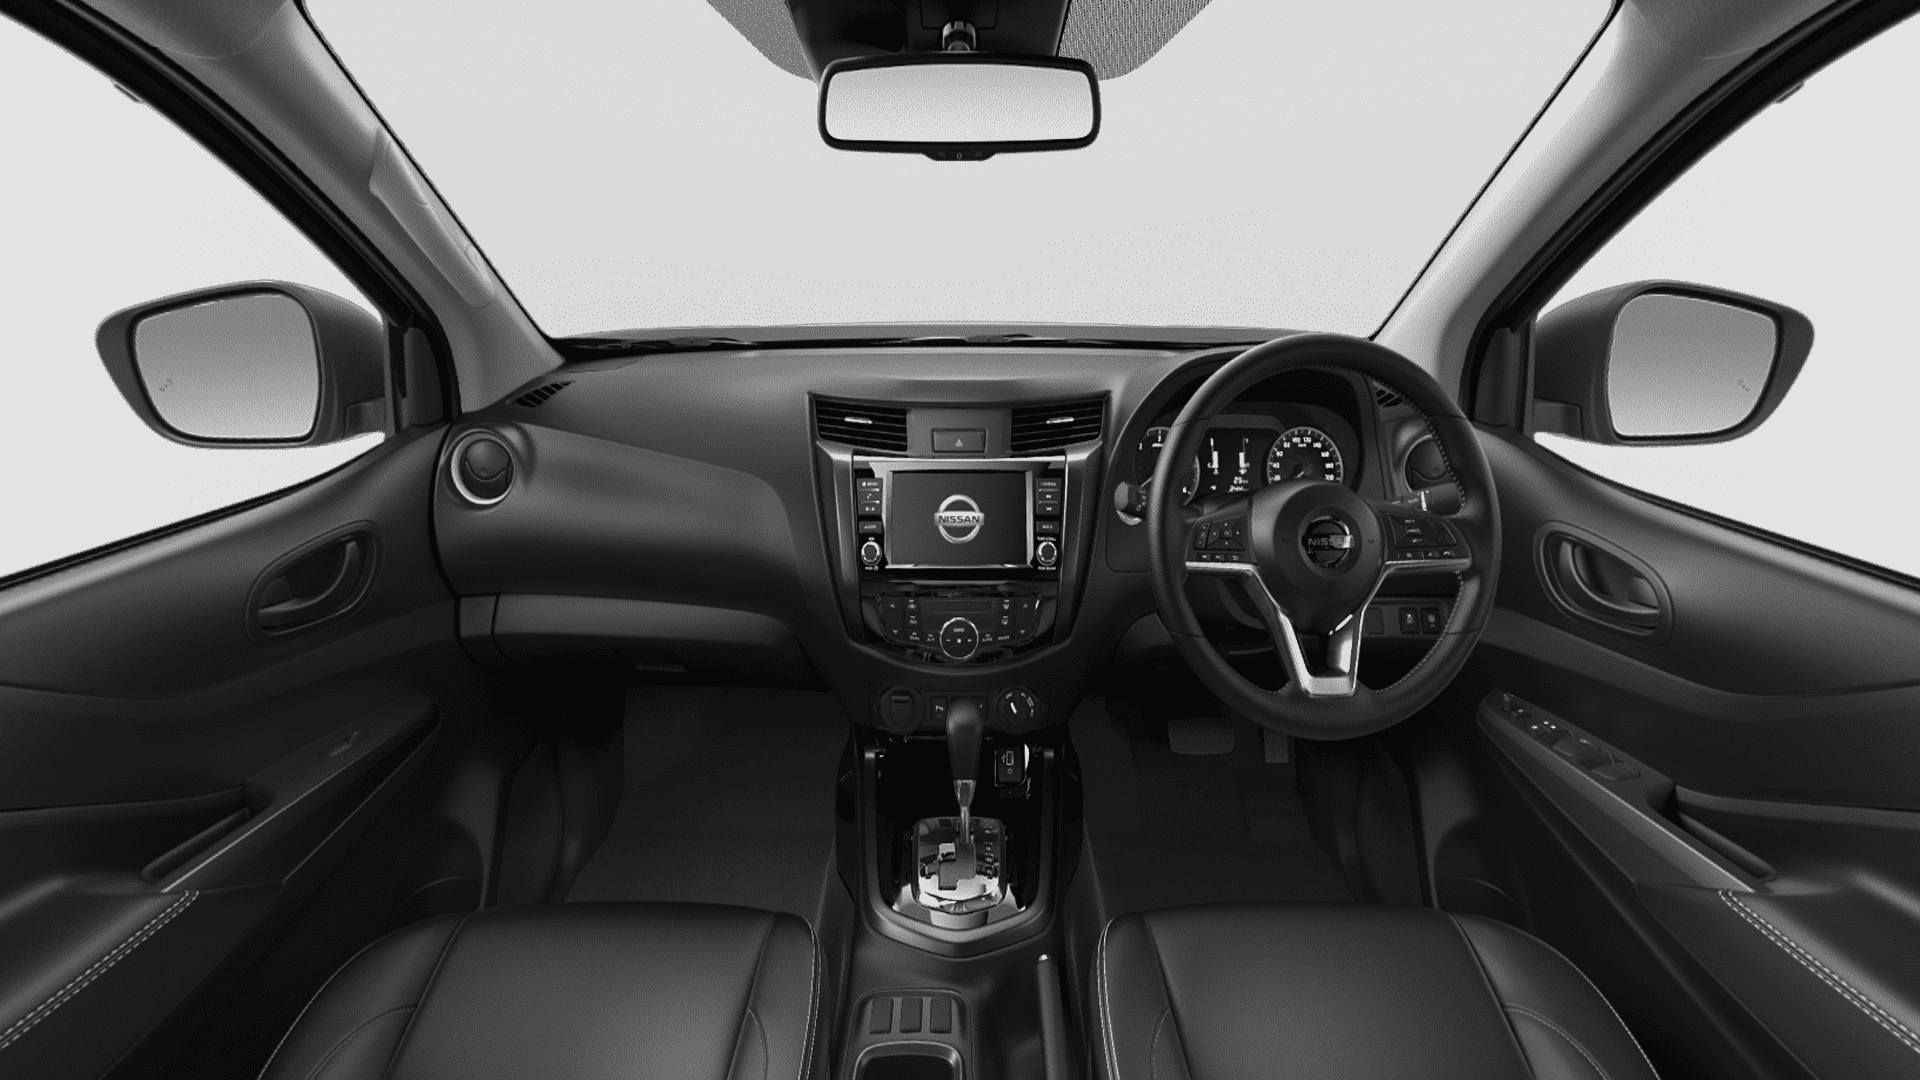 The Interior, Steering, Dashboard, And Central Console Of A Nissan Navara